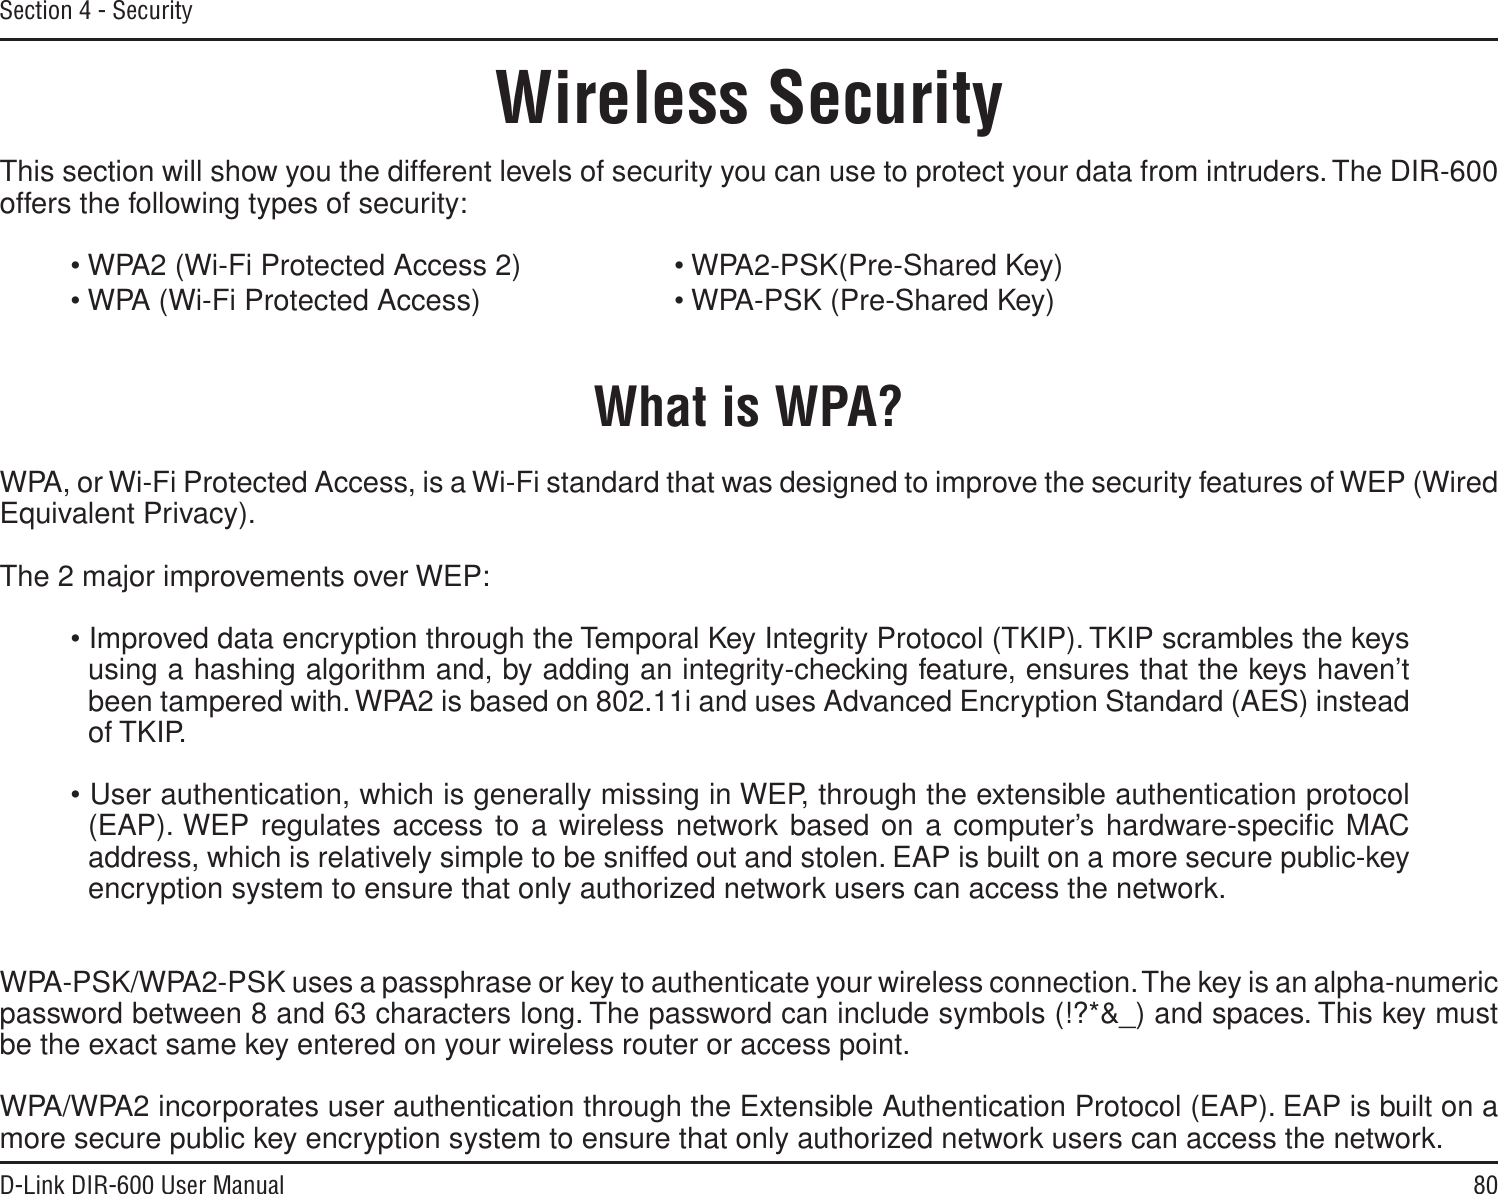 80D-Link DIR-600 User ManualSection 4 - SecurityWireless SecurityThis section will show you the different levels of security you can use to protect your data from intruders. The DIR-600 offers the following types of security:• WPA2 (Wi-Fi Protected Access 2)     • WPA2-PSK(Pre-Shared Key)• WPA (Wi-Fi Protected Access)      • WPA-PSK (Pre-Shared Key)What is WPA?WPA, or Wi-Fi Protected Access, is a Wi-Fi standard that was designed to improve the security features of WEP (Wired Equivalent Privacy).  The 2 major improvements over WEP: • Improved data encryption through the Temporal Key Integrity Protocol (TKIP). TKIP scrambles the keys using a hashing algorithm and, by adding an integrity-checking feature, ensures that the keys haven’t been tampered with. WPA2 is based on 802.11i and uses Advanced Encryption Standard (AES) instead of TKIP.• User authentication, which is generally missing in WEP, through the extensible authentication protocol (EAP). WEP regulates access to a wireless network based on a computer’s hardware-speciﬁc MAC address, which is relatively simple to be sniffed out and stolen. EAP is built on a more secure public-key encryption system to ensure that only authorized network users can access the network.WPA-PSK/WPA2-PSK uses a passphrase or key to authenticate your wireless connection. The key is an alpha-numeric password between 8 and 63 characters long. The password can include symbols (!?*&amp;_) and spaces. This key must be the exact same key entered on your wireless router or access point.WPA/WPA2 incorporates user authentication through the Extensible Authentication Protocol (EAP). EAP is built on a more secure public key encryption system to ensure that only authorized network users can access the network.